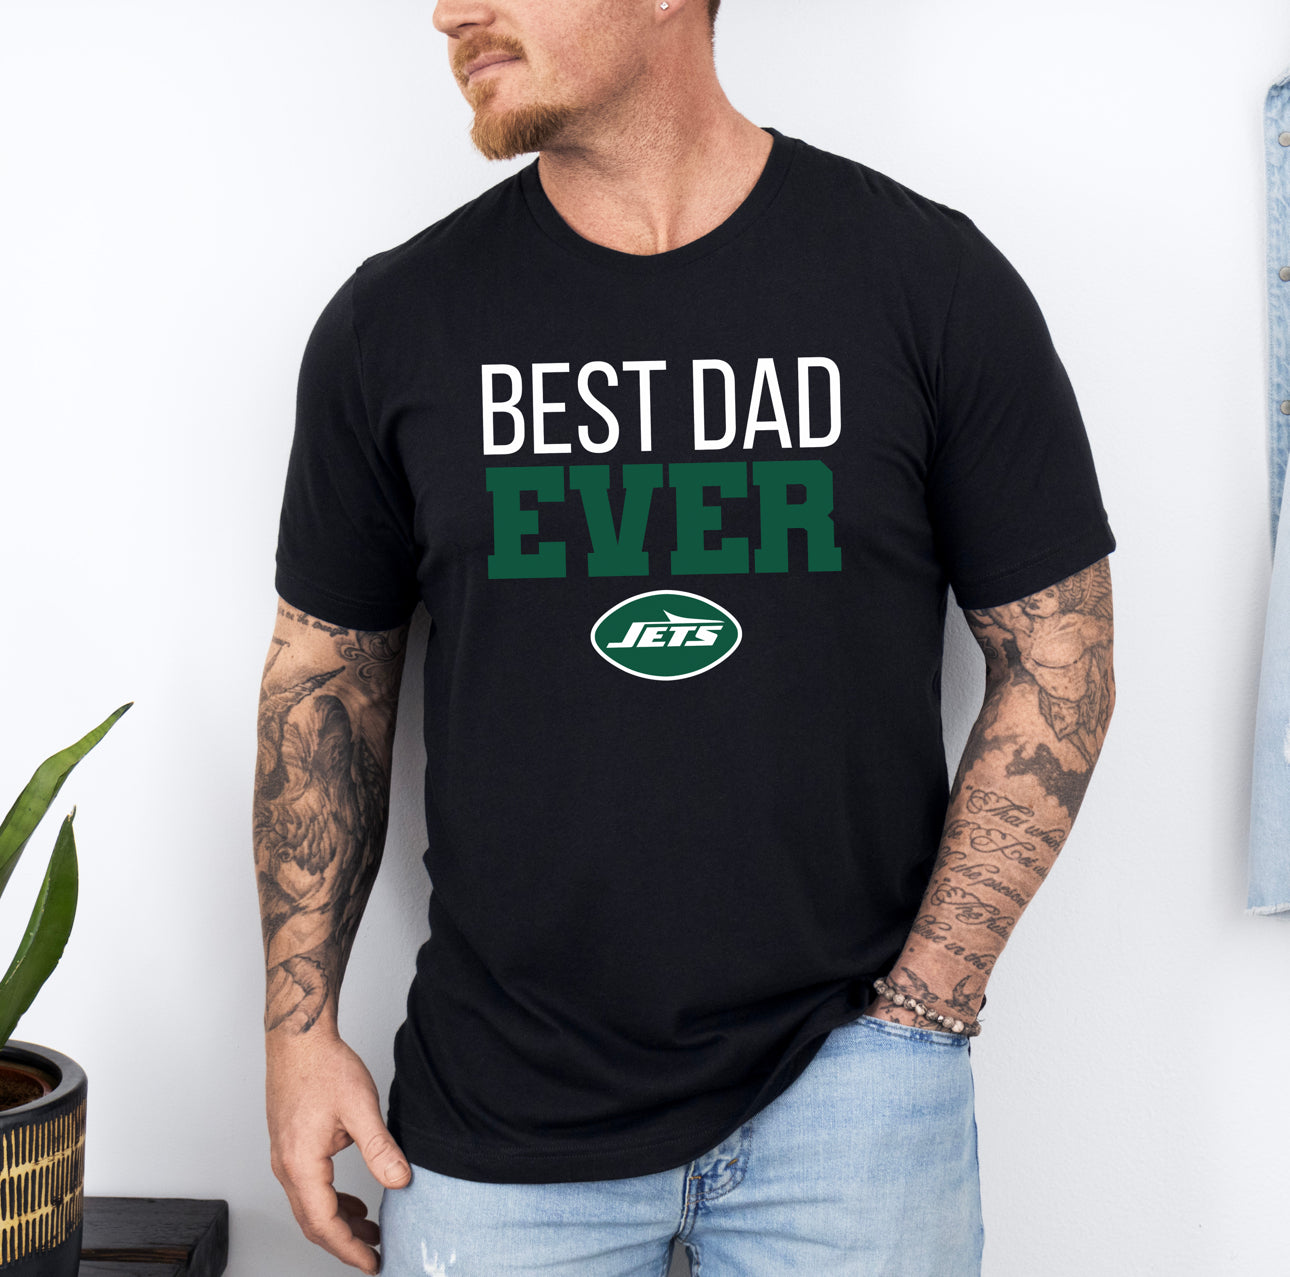 Best Dad Ever Sports Logo Theme T-Shirts, Best Dad Ever T-Shirt, Father’s Day T-Shirt, Best Dad Ever NY Jets T-Shirt